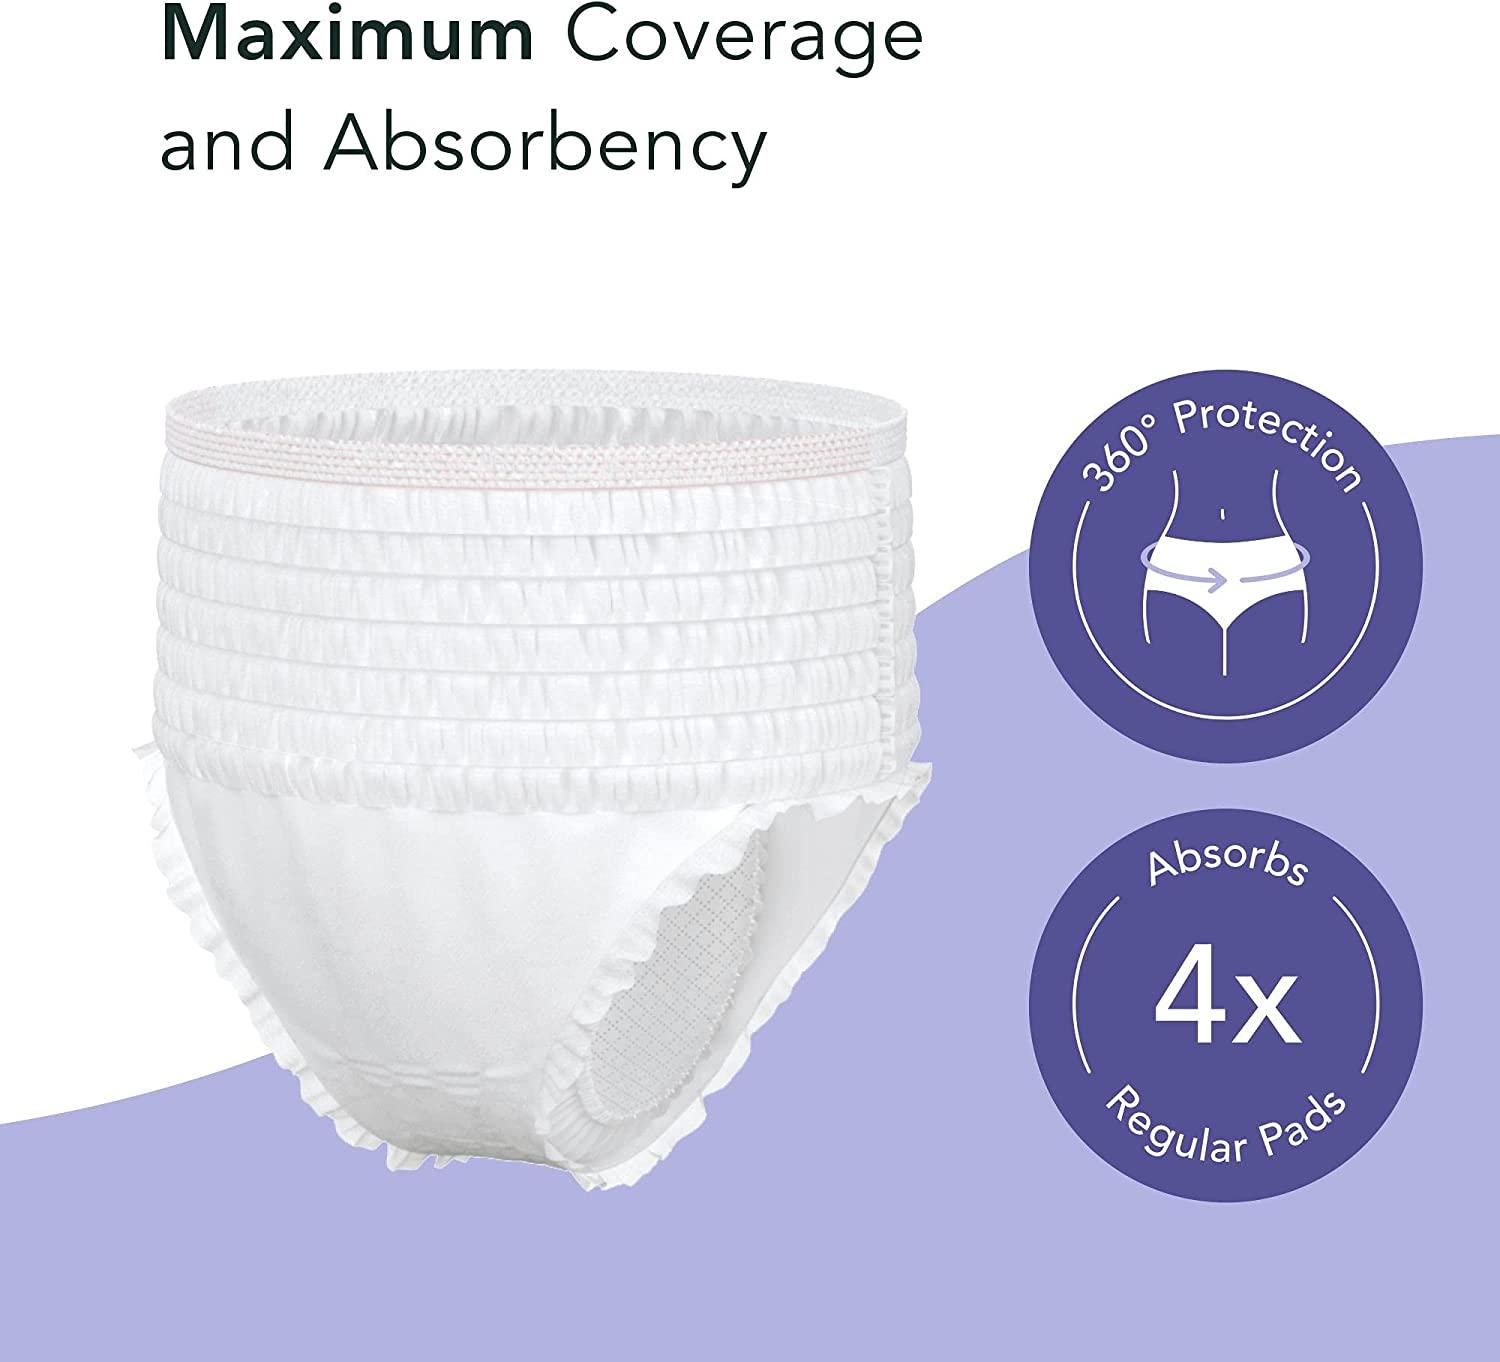 My Menstrual Disposable Protective Panties, 10 count